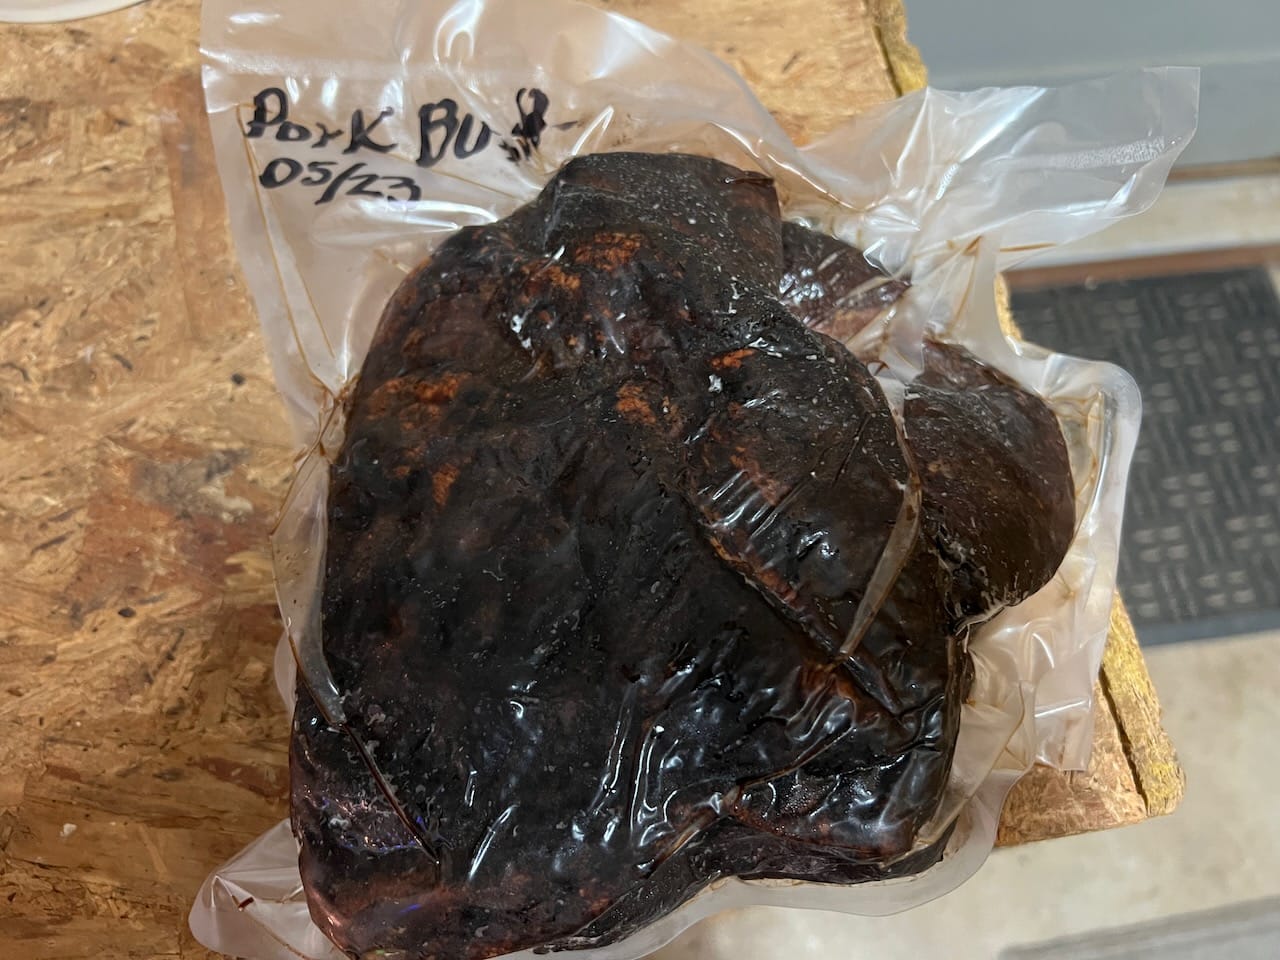 Whole pork butt we were able to vacuum seal because it was a smaller size.